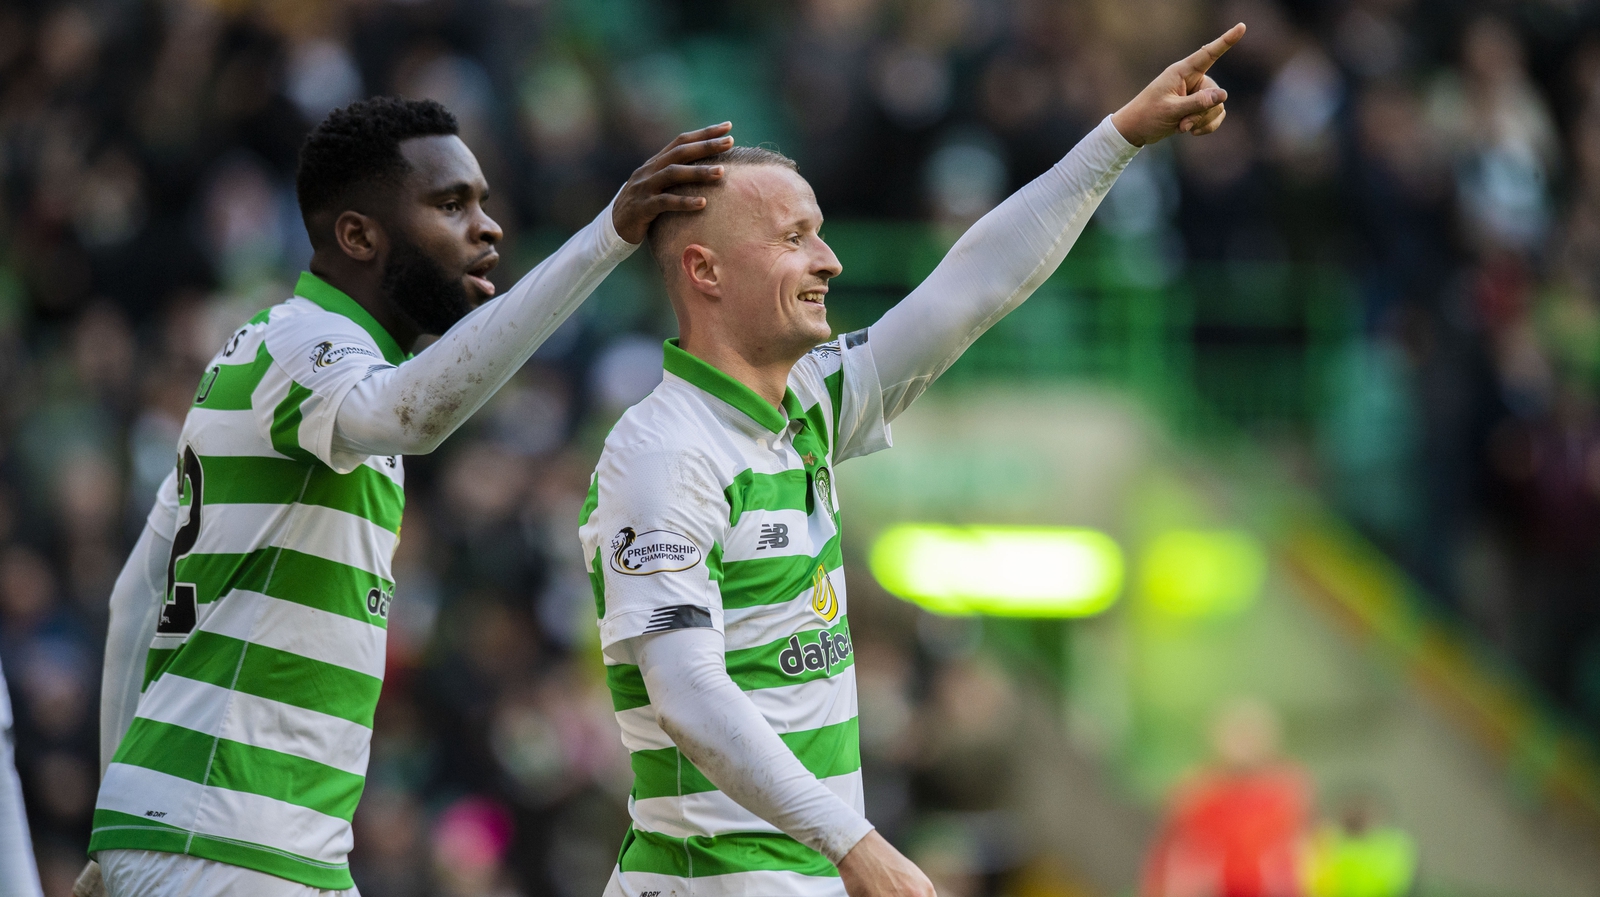 Celtic’s lead extended to 12 points as Rangers falter